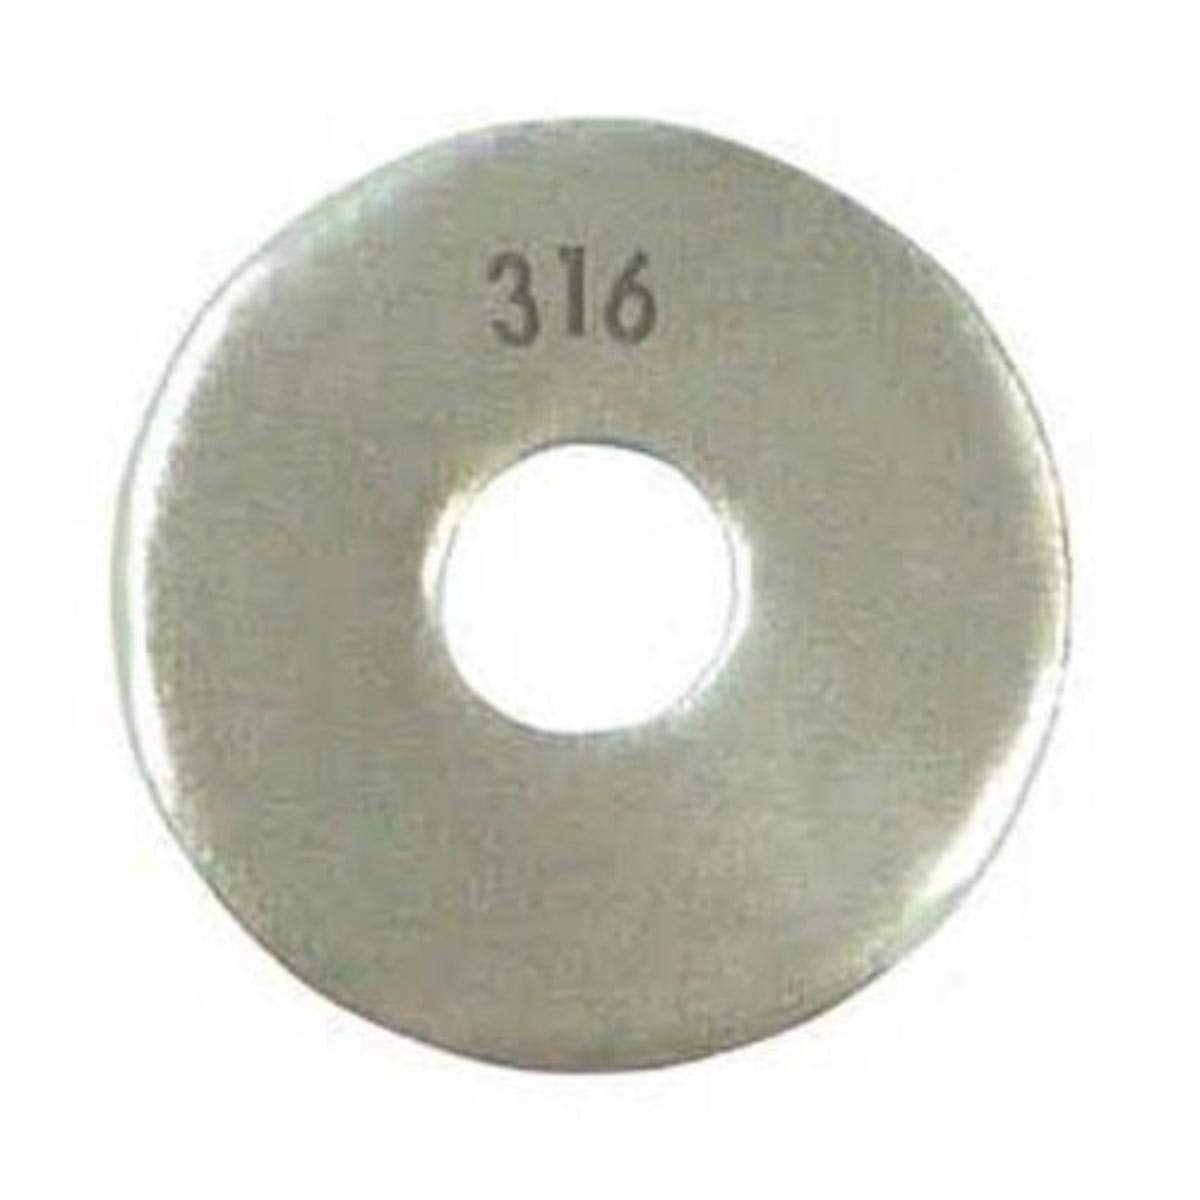 Box of 25 M12 Flat Washer A2 Stainless Steel DIN 125 